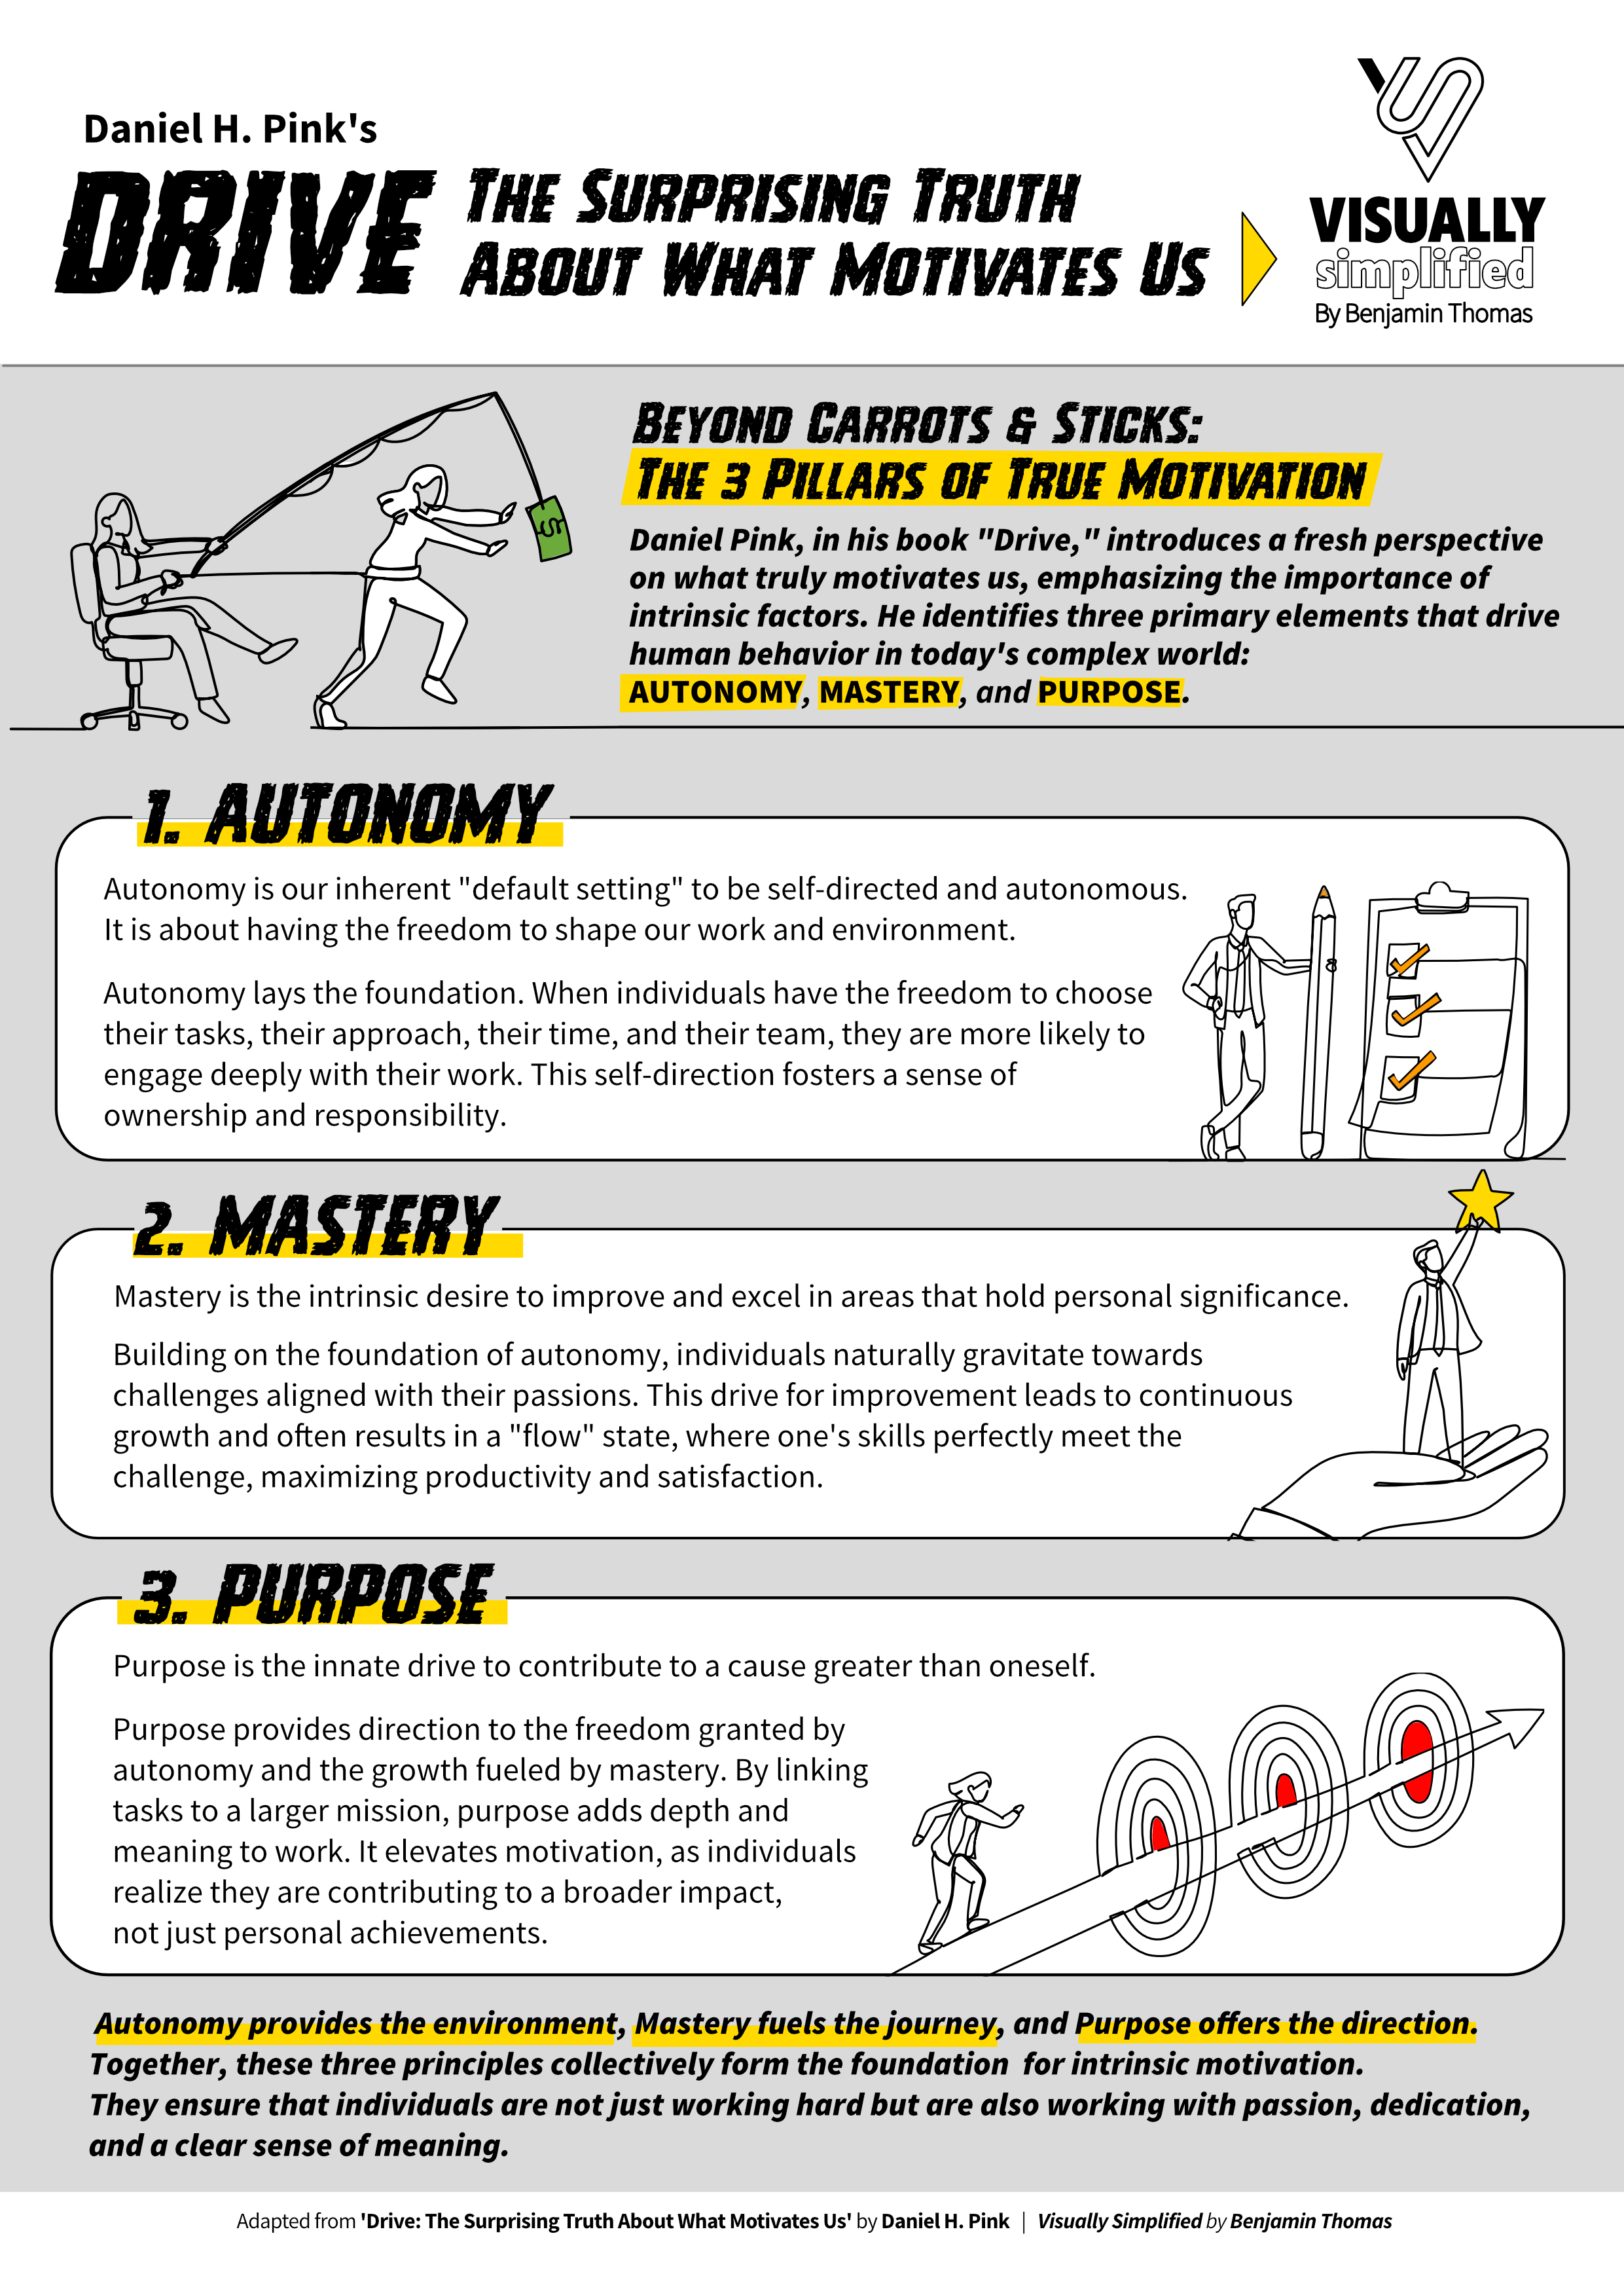 Seven Characteristics of Emerging Leaders - by Steve Gutzler - Visually Simplified by Benjamin Thomas